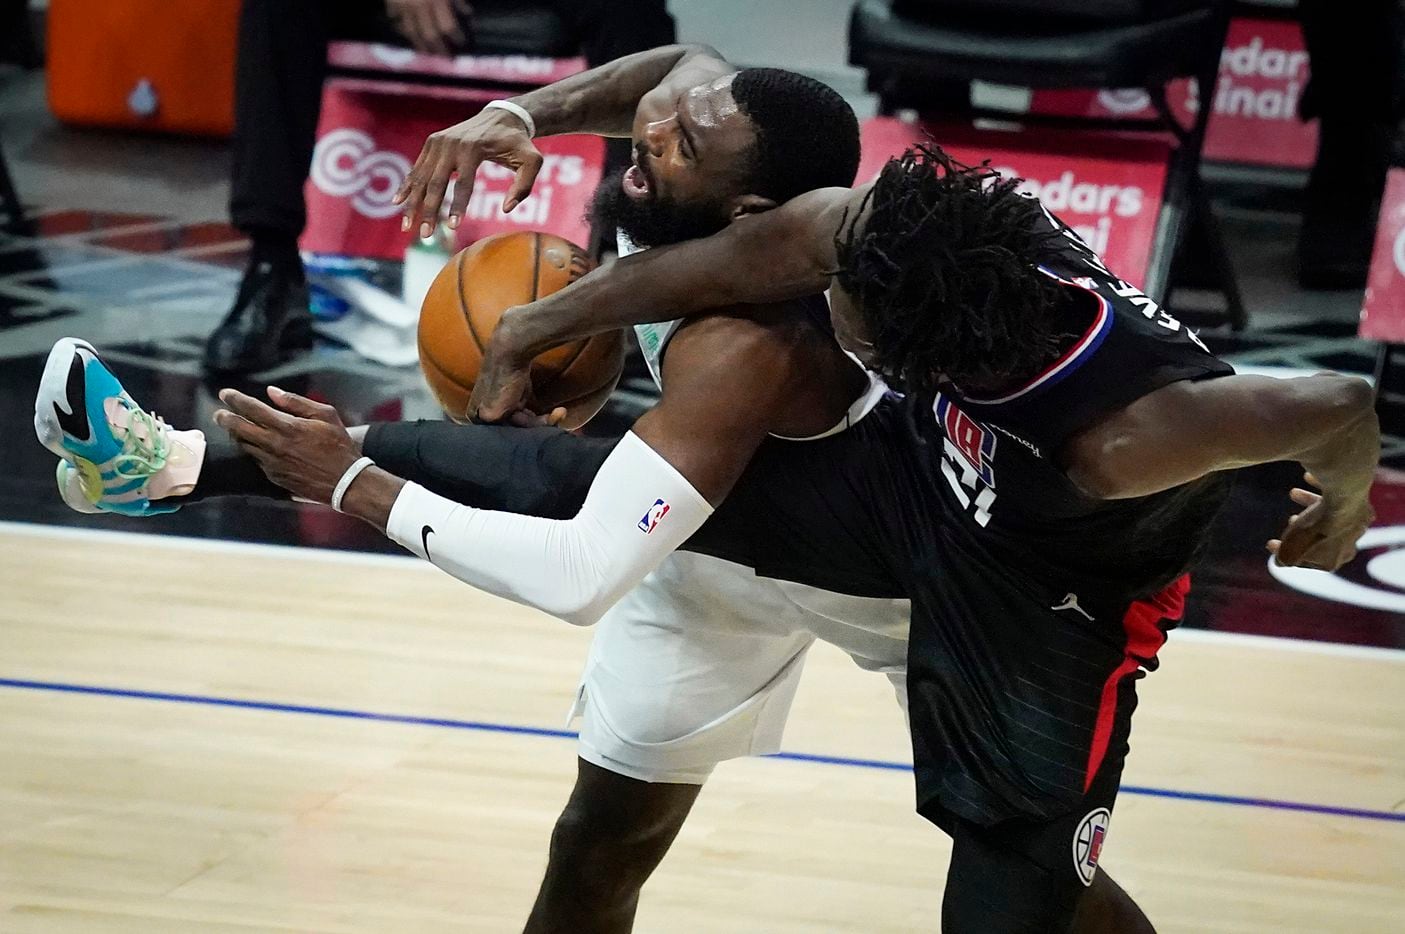 Dallas Mavericks forward Tim Hardaway Jr. (11) is fouled by LA Clippers guard Patrick Beverley (21) during the second half of an NBA playoff basketball game at Staples Center on Tuesday, May 25, 2021, in Los Angeles. The Mavericks won the game 127-121.